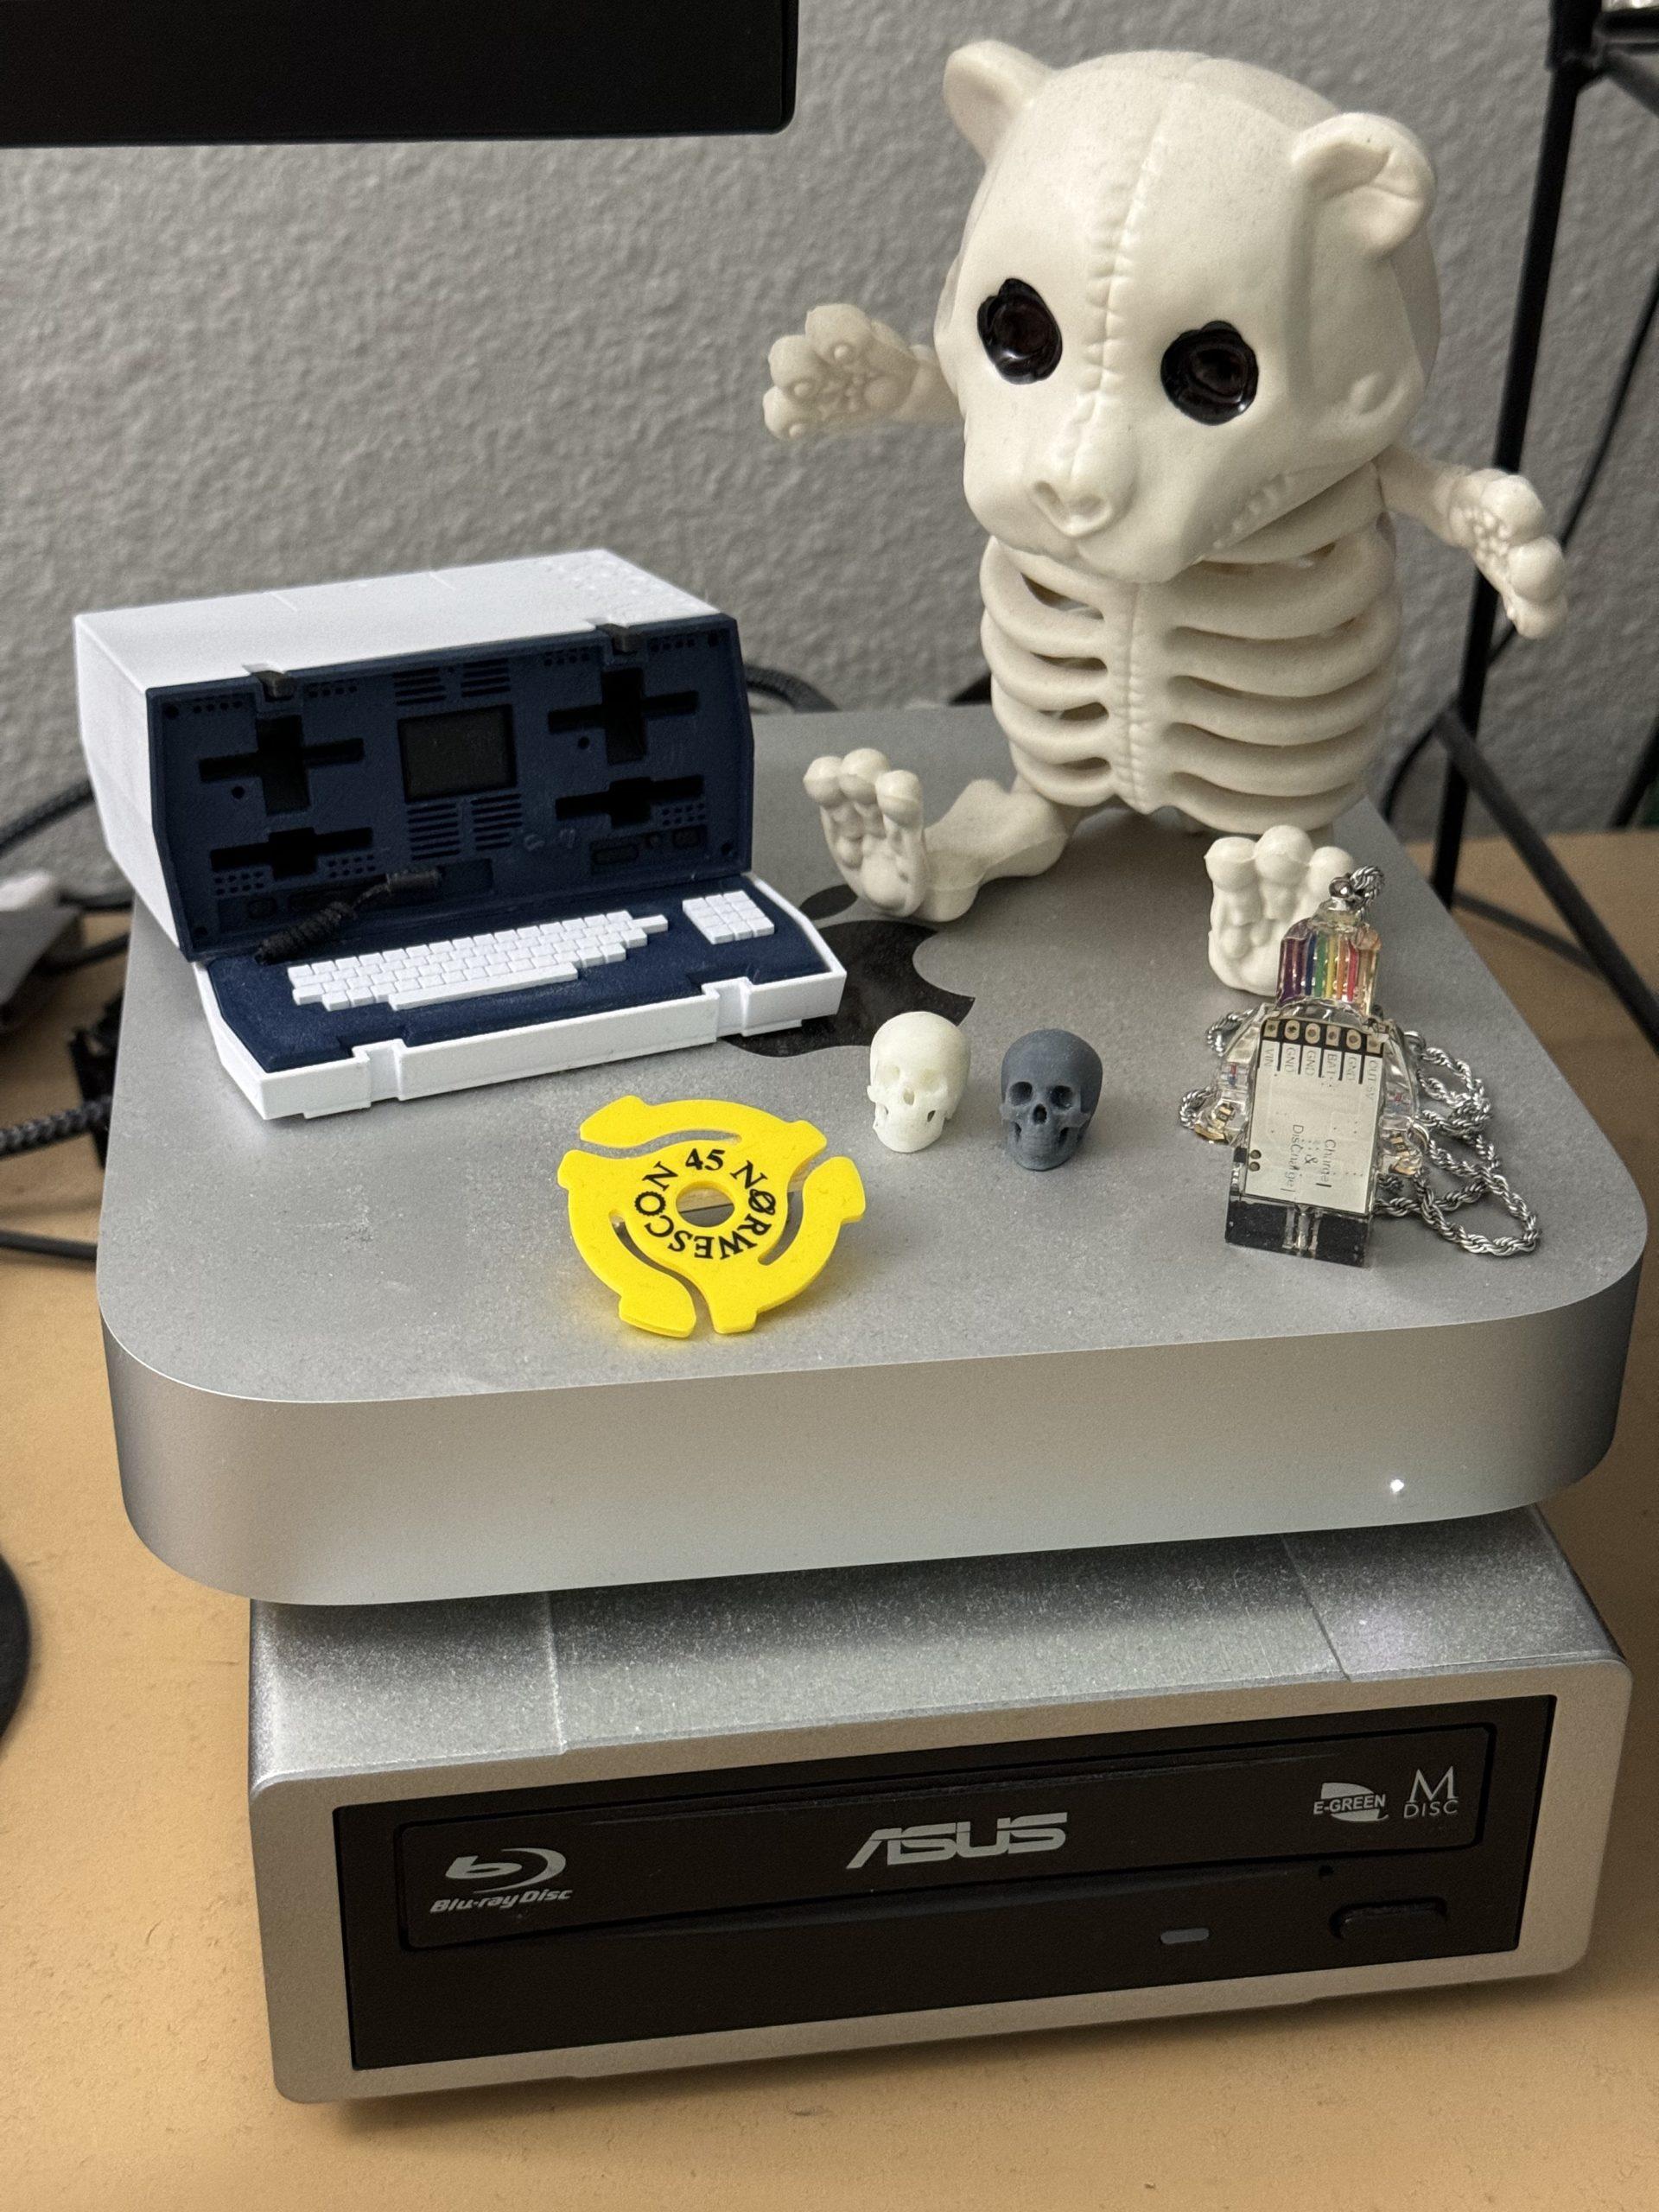 The mini Osborne sitting on top of my Mac mini, next to a teddy bear skeleton, Lego figure pendant, two tiny 3D printed skulls, and a 45 single adapter pin with the Norwescon 45 logo.